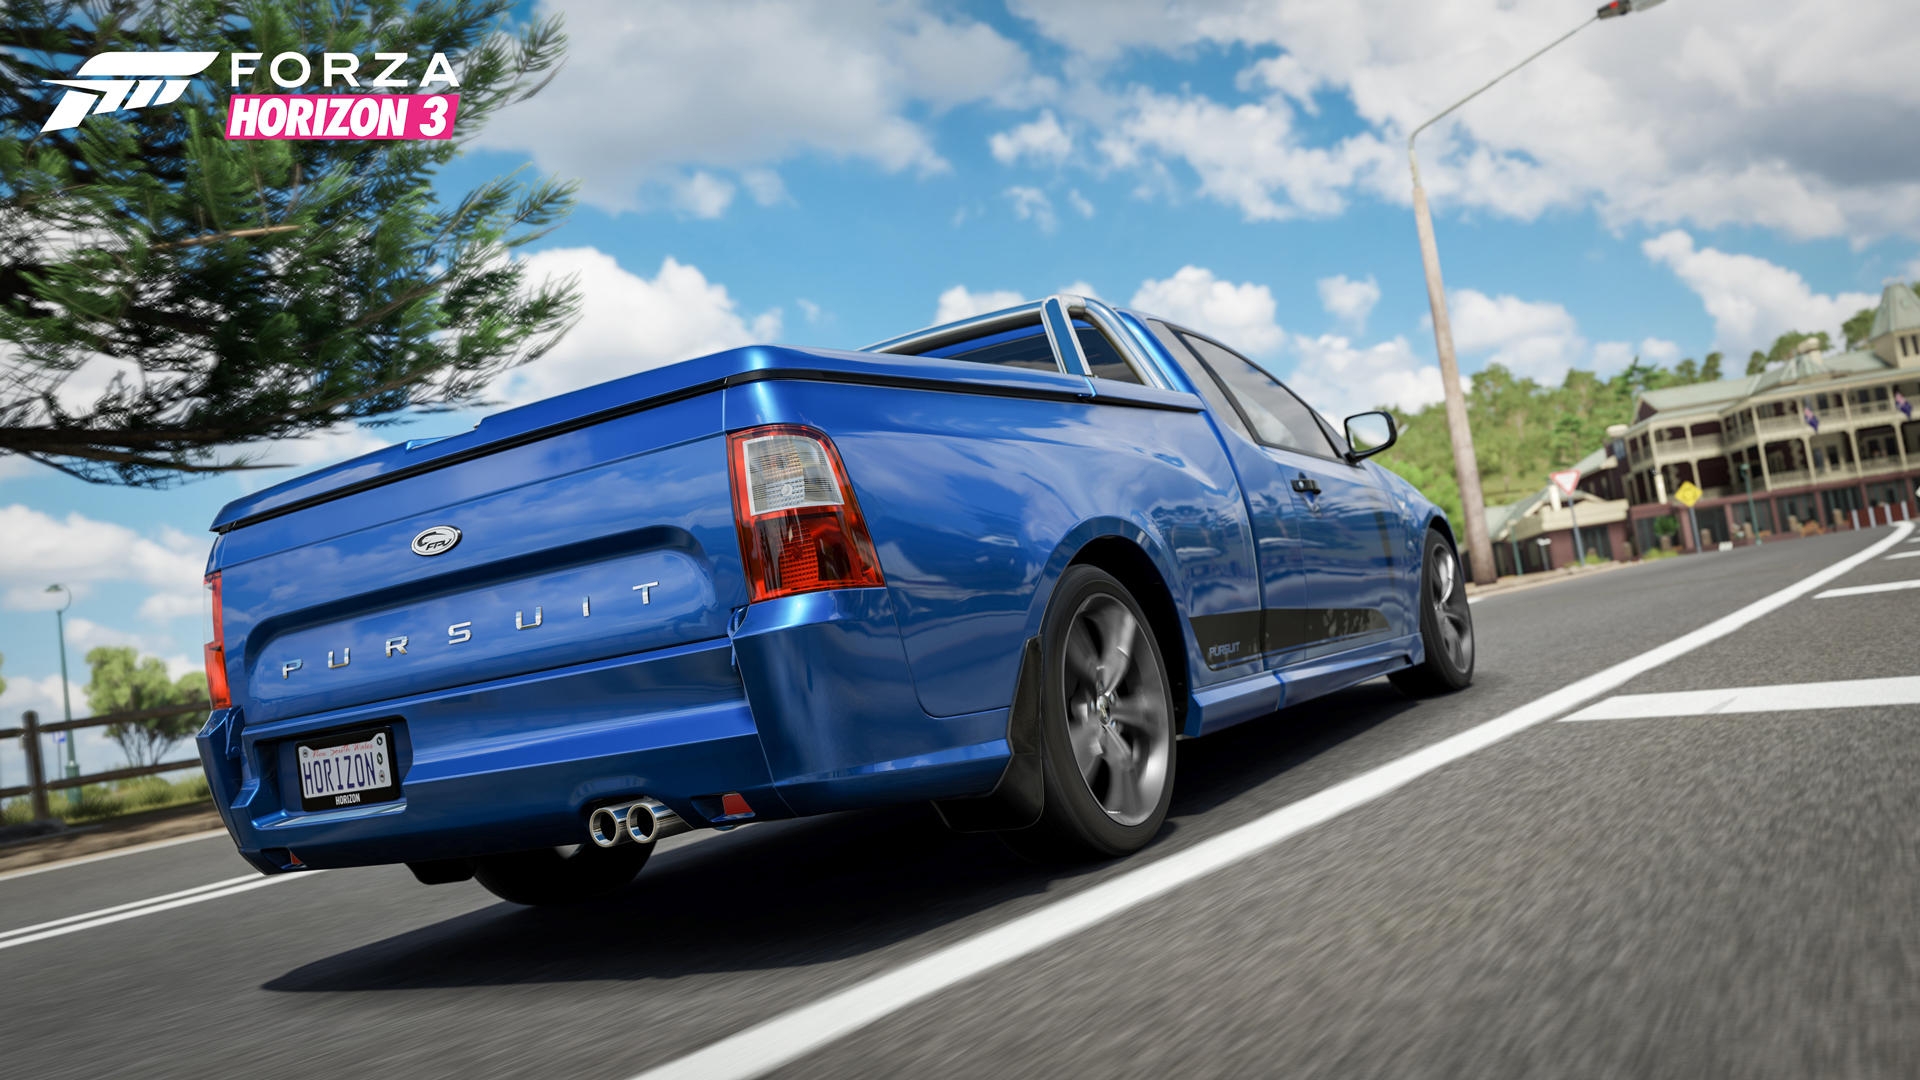 Blue pickup truck in the game forza horizon 3